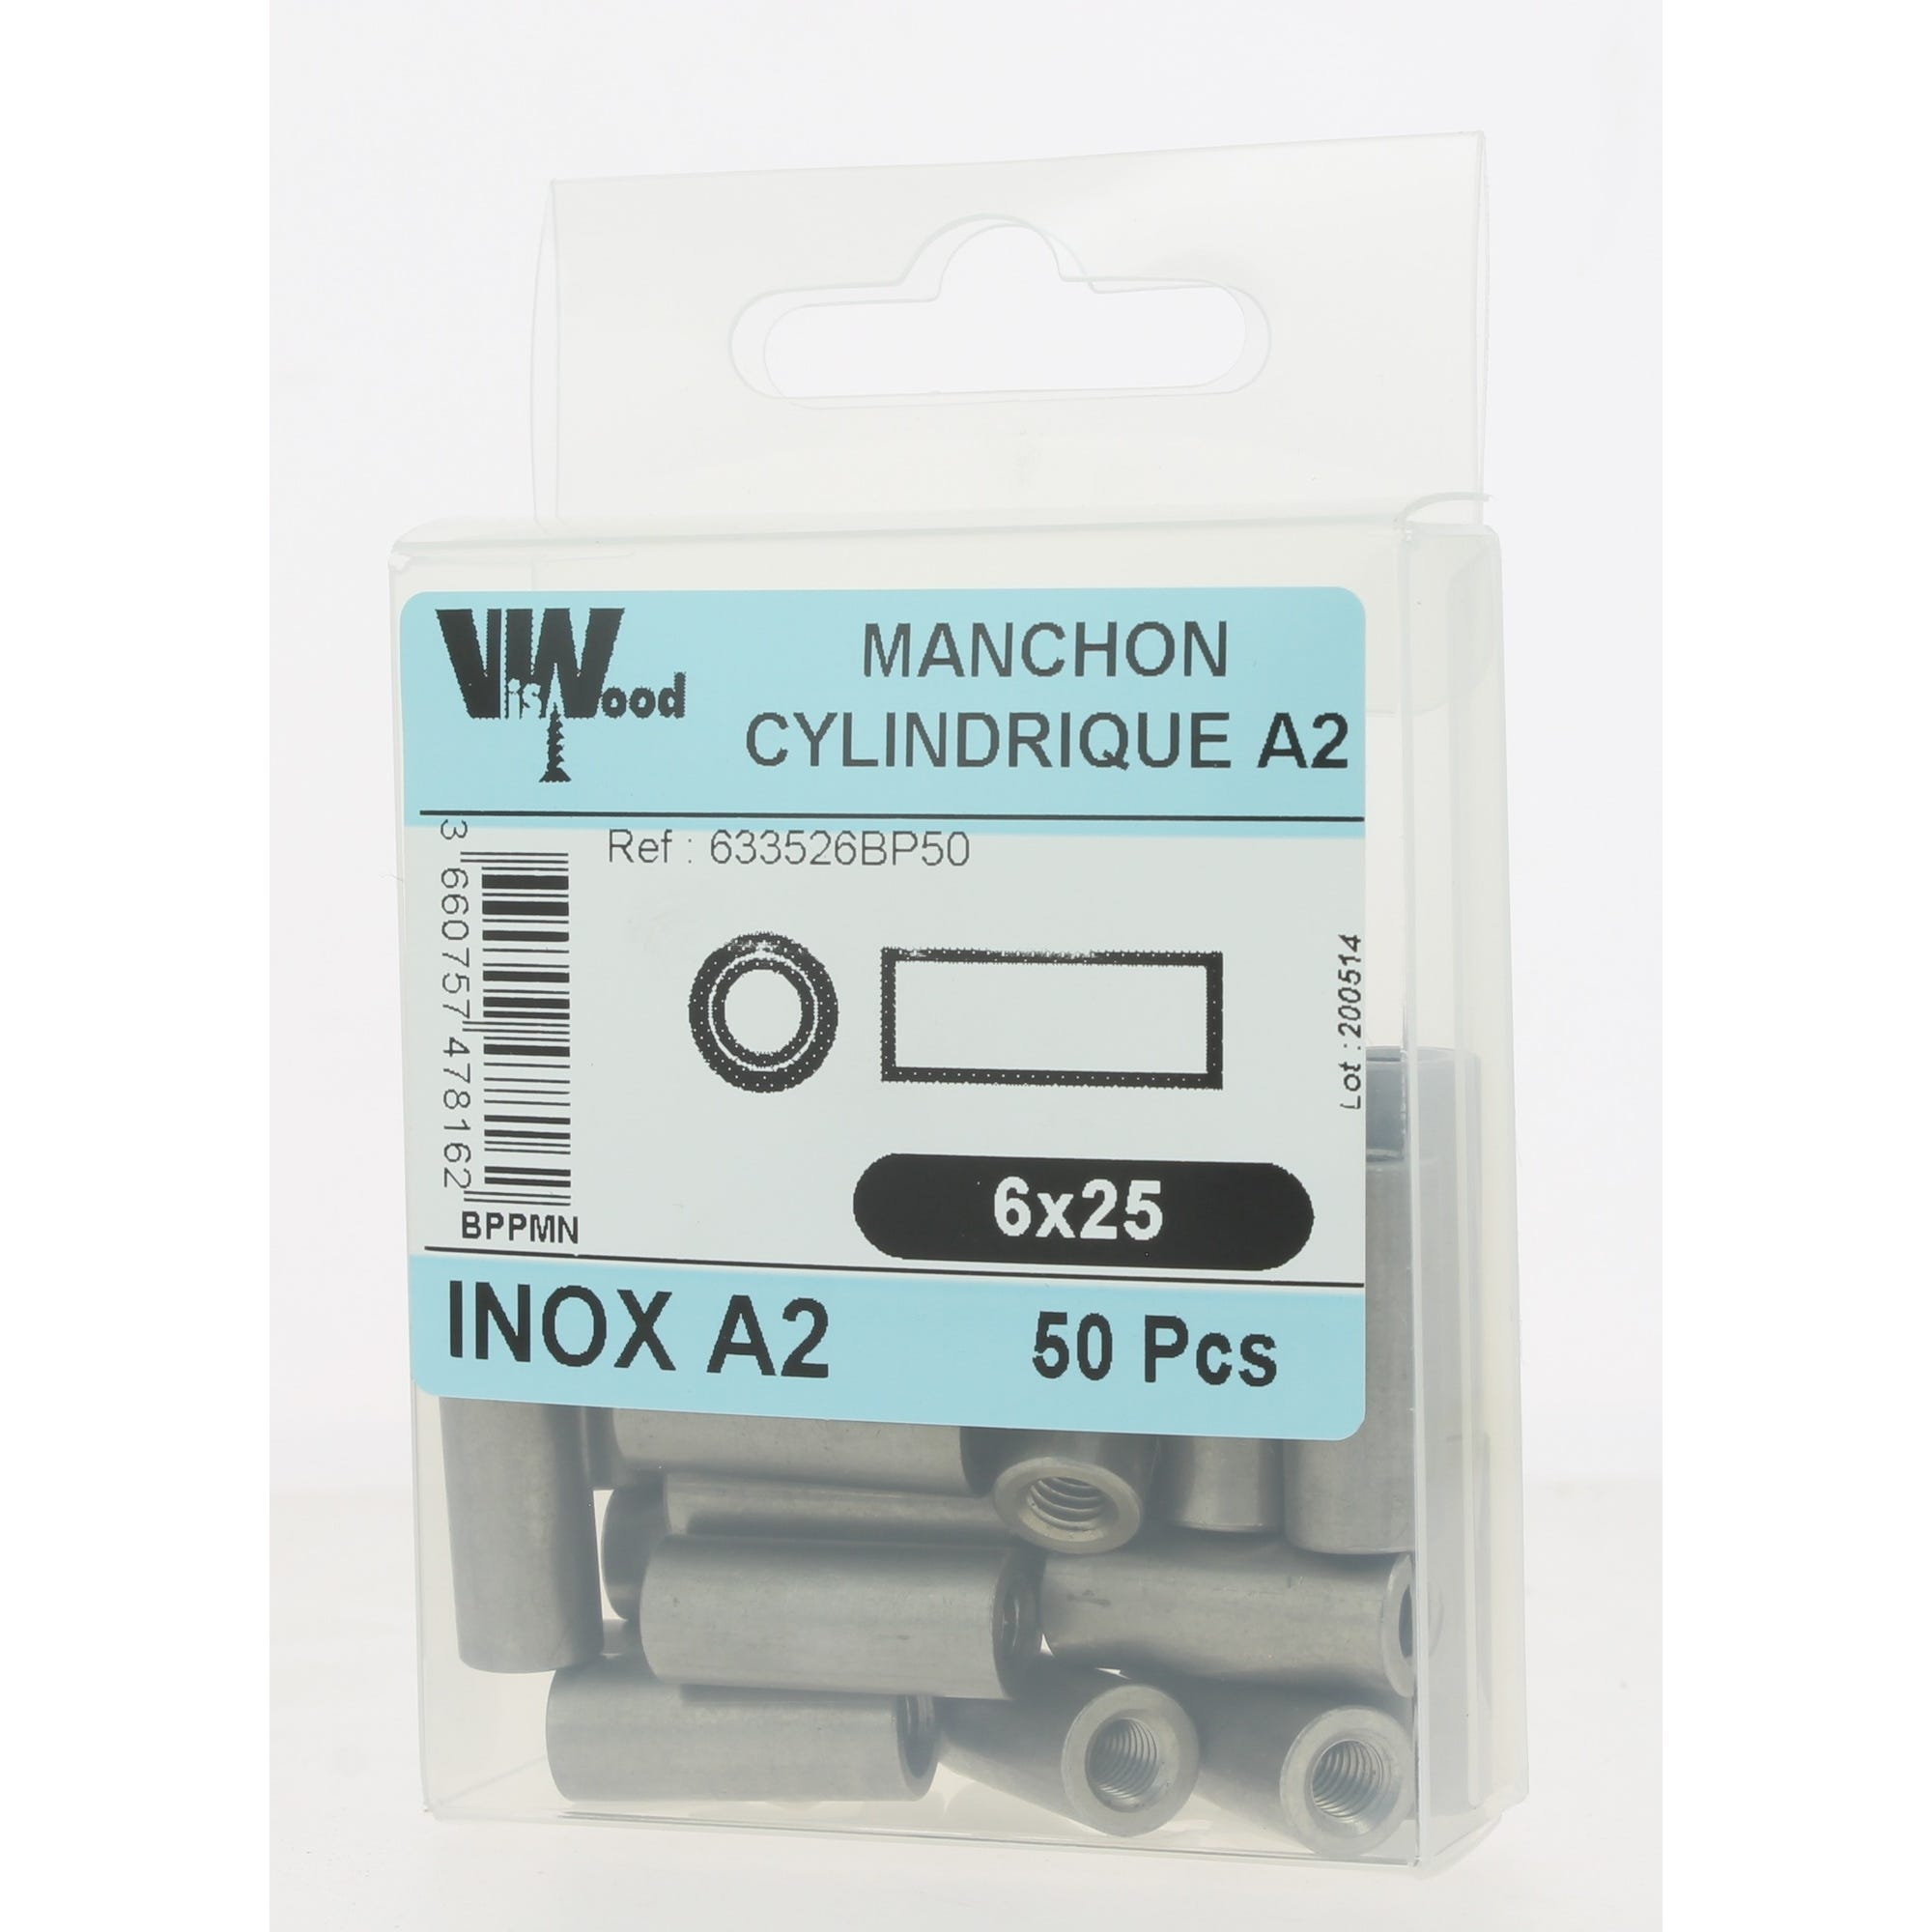 Manchons cylindrique inox a2 m6x25 x50 1